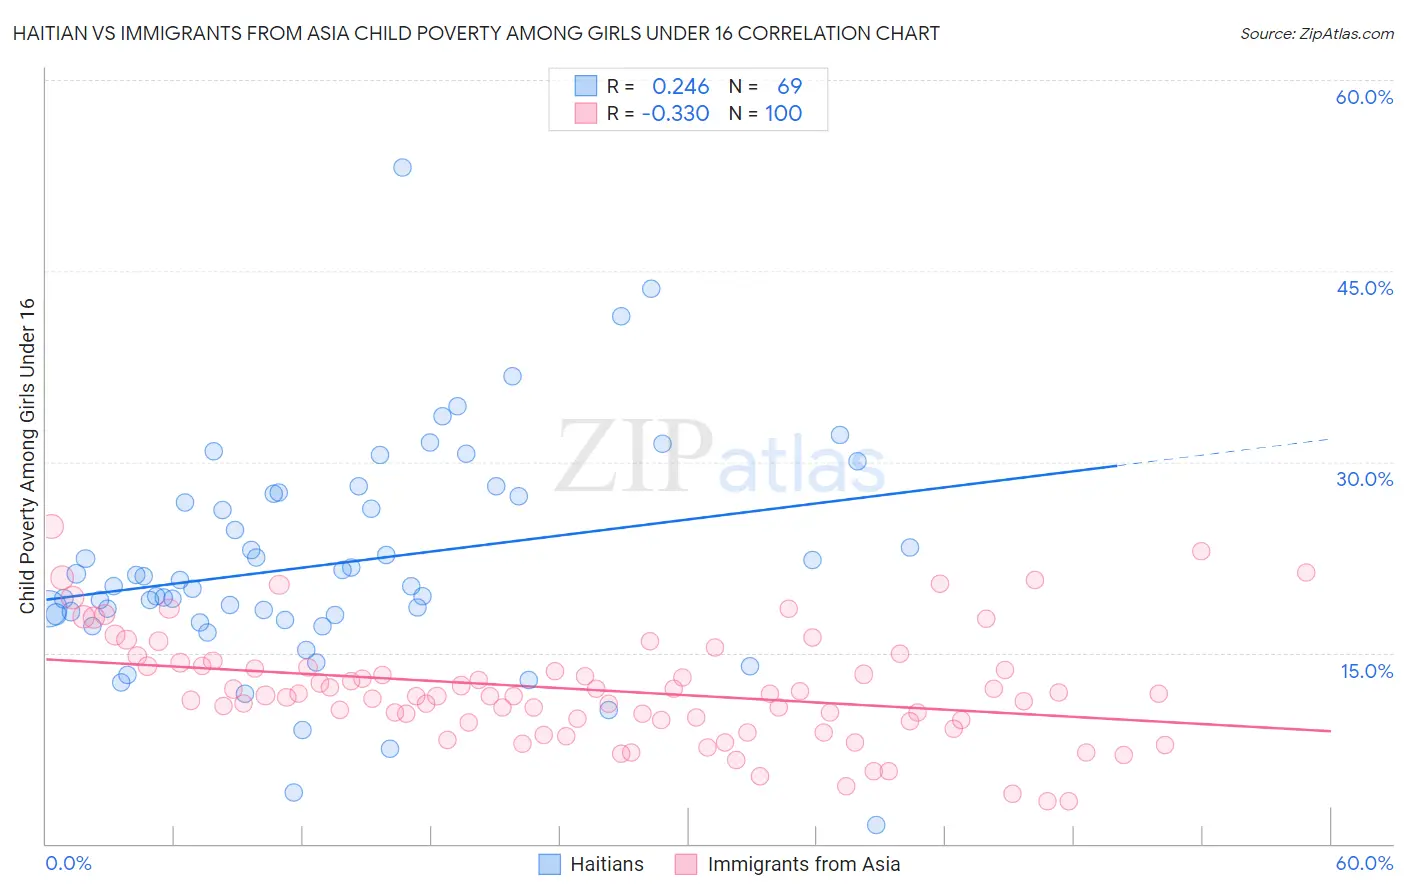 Haitian vs Immigrants from Asia Child Poverty Among Girls Under 16